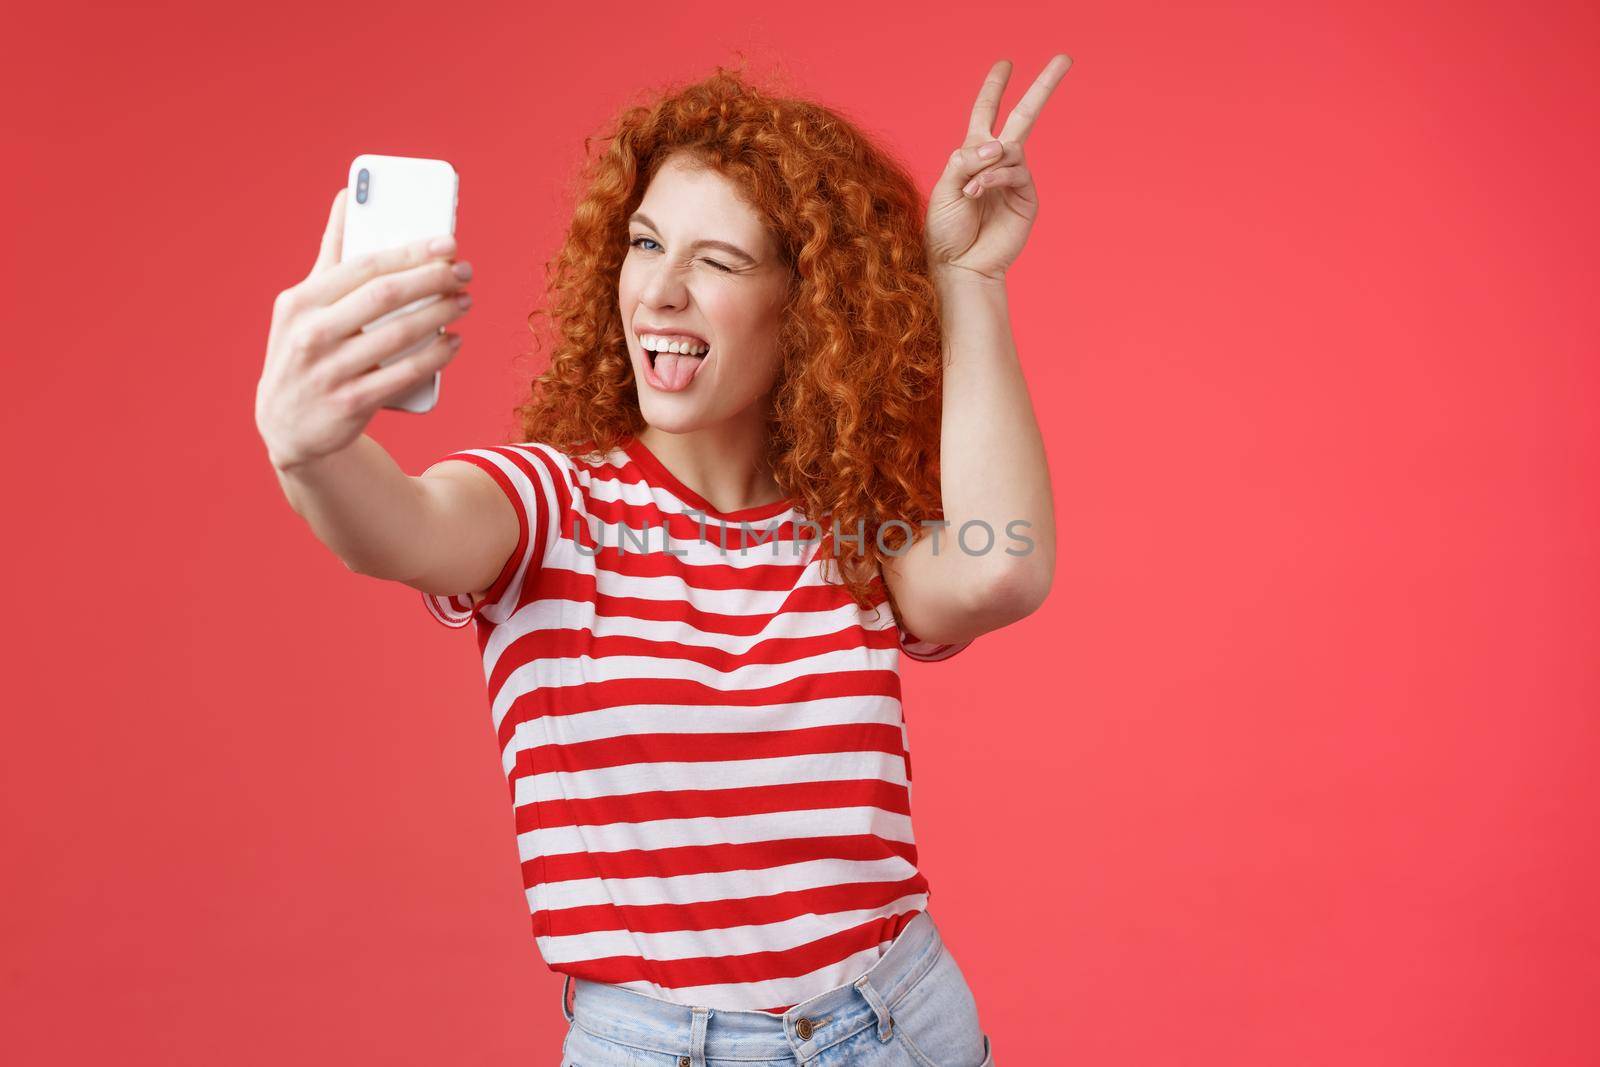 Sassy fashionable playful good-looking redhead daring curly woman show peace victory animal ears gesture winking smartphone display record vlog taking selfie awesome phone camera red background.